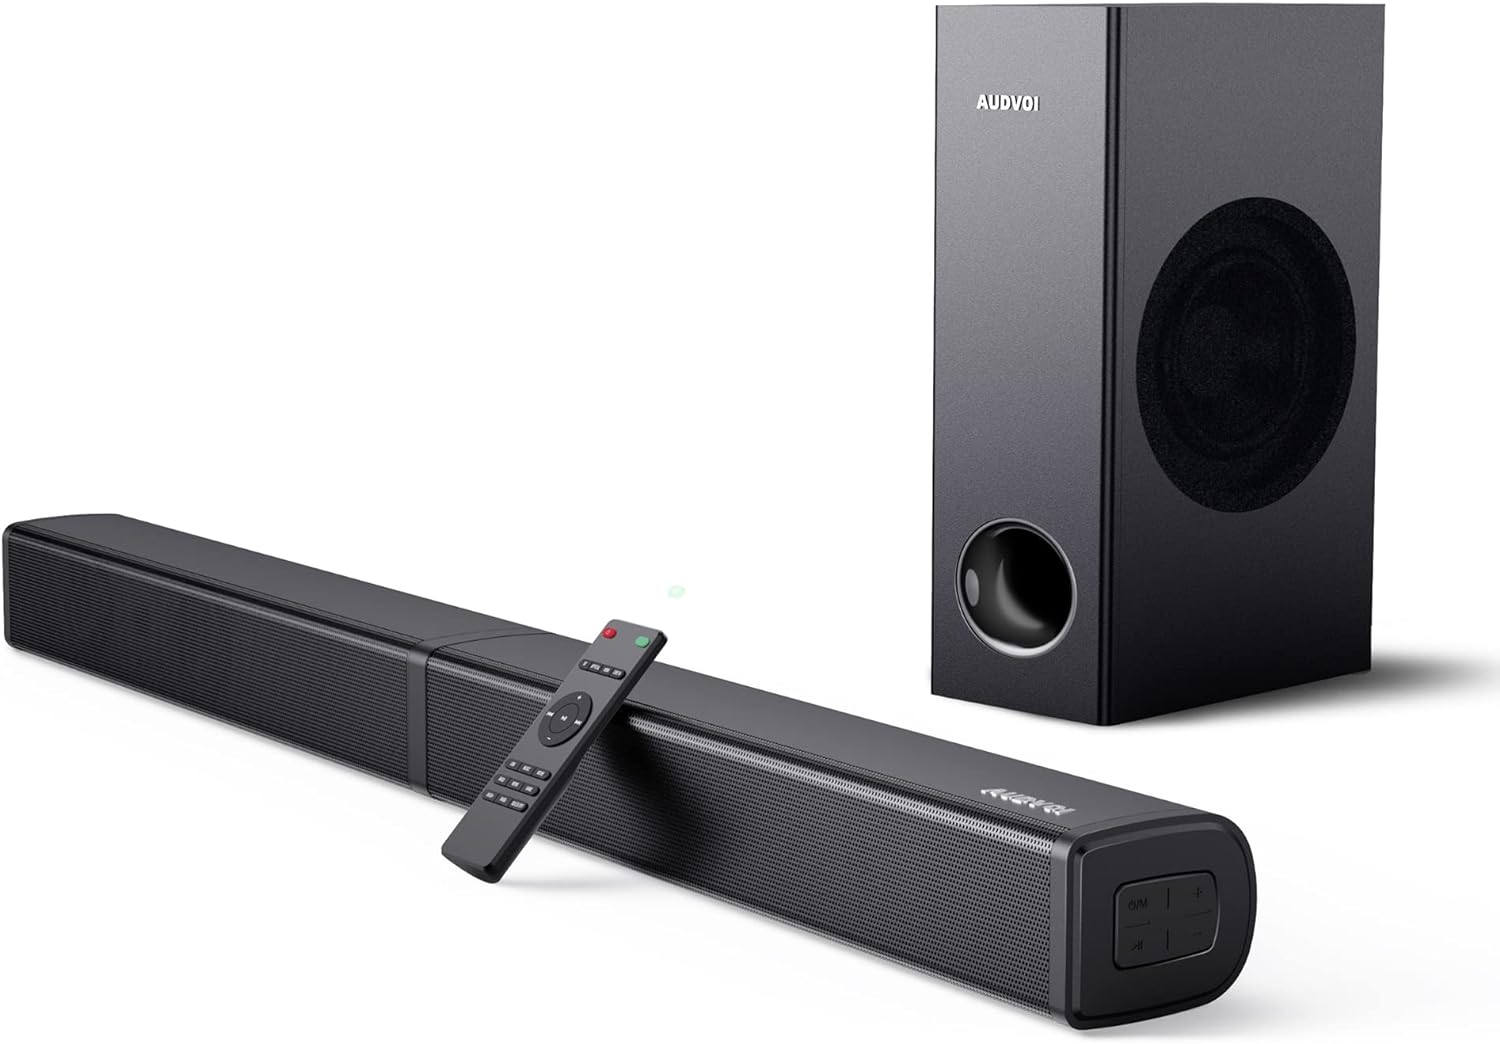 2.1CH Sound Bar for TV with Subwoofer Review